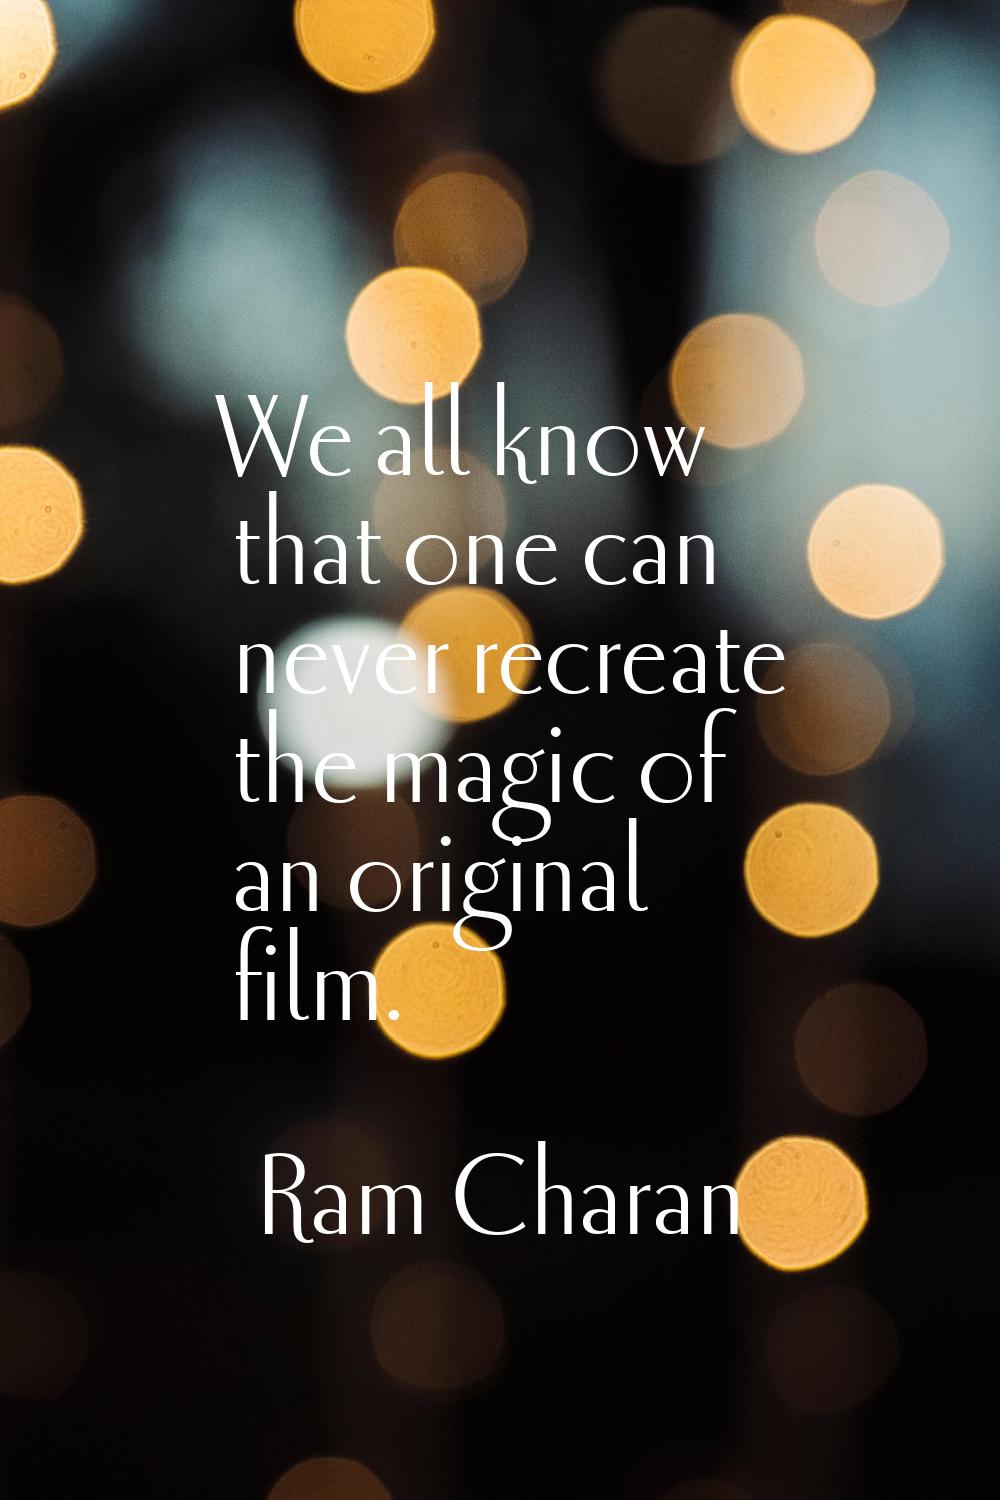 We all know that one can never recreate the magic of an original film.